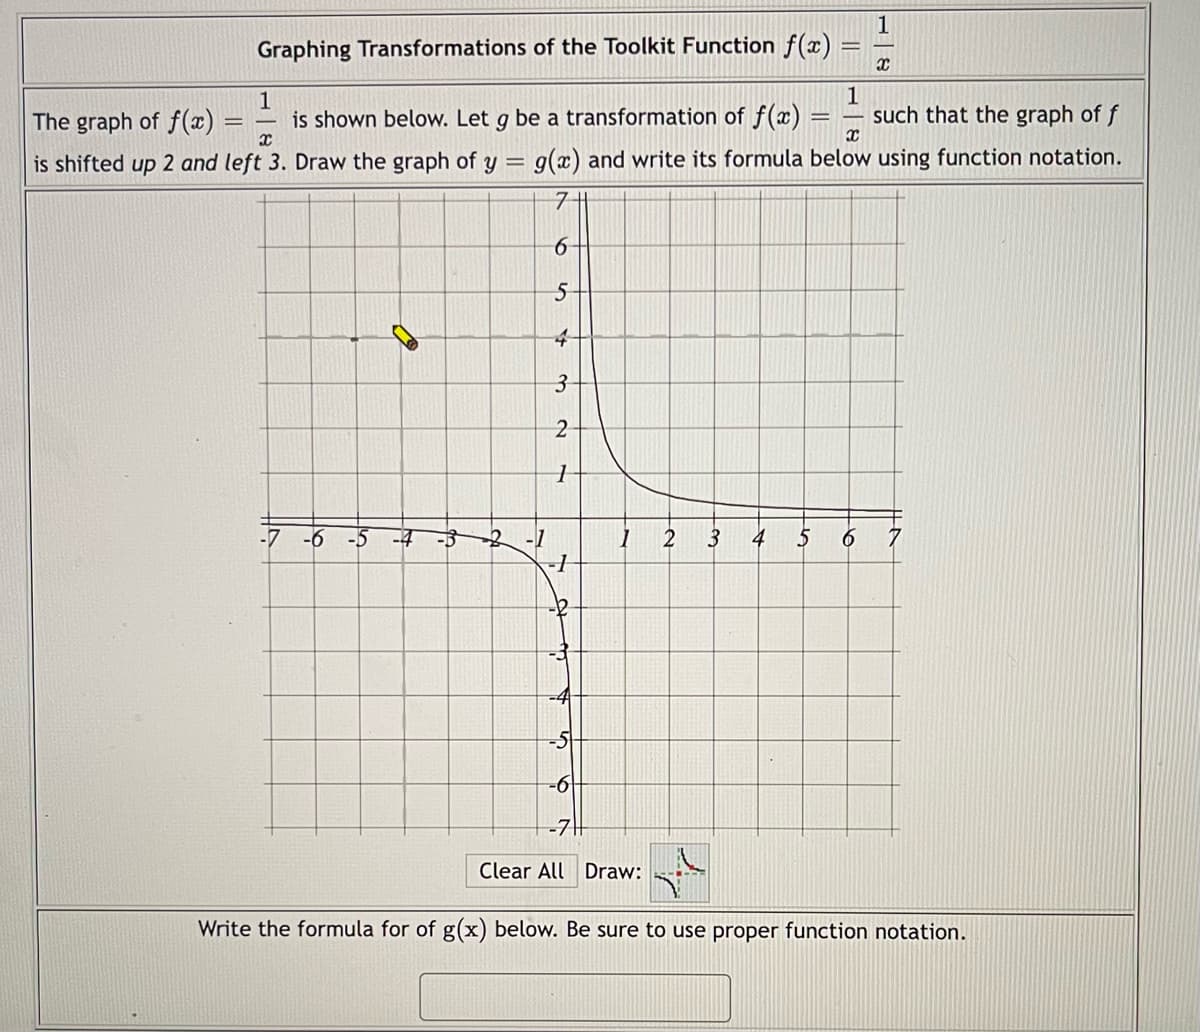 1
Graphing Transformations of the Toolkit Function f(x)
X
1
1
=
The graph of f(x)
=
is shown below. Let g be a transformation of f(x) such that the graph of f
is shifted up 2 and left 3. Draw the graph of y = g(x) and write its formula below using function notation.
x
X
7
6
5
4
3
2
1
-7 -6 -5 -4 -5
4 5 6 7
-1
-6
-7
Clear All Draw:
Write the formula for of g(x) below. Be sure to use proper function notation.
2-1
1
2
3